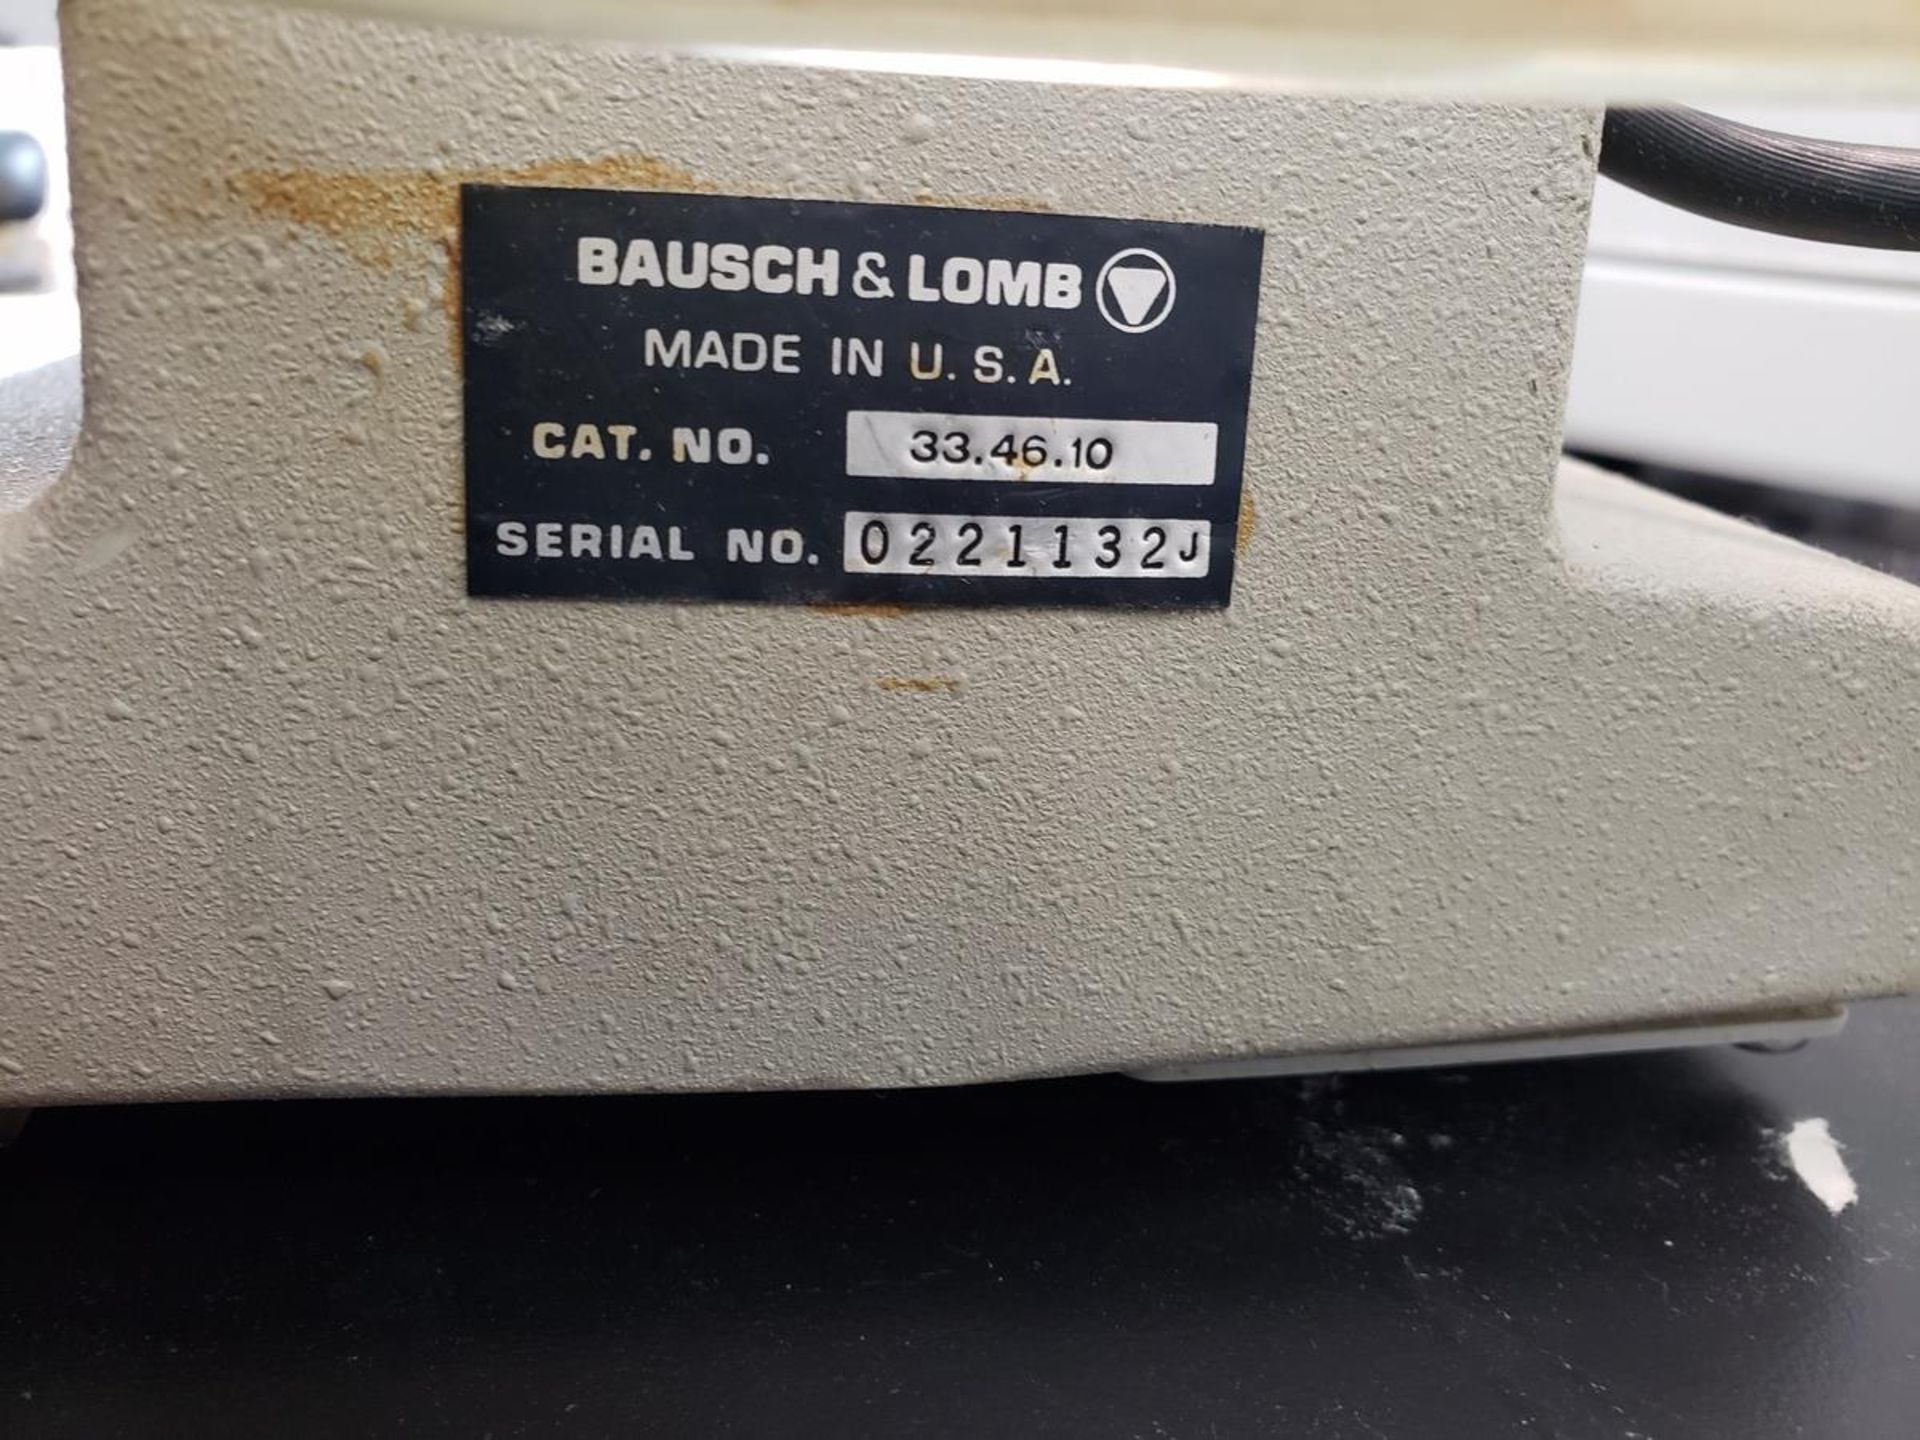 Bausch & Lomb Microscope - Image 2 of 2